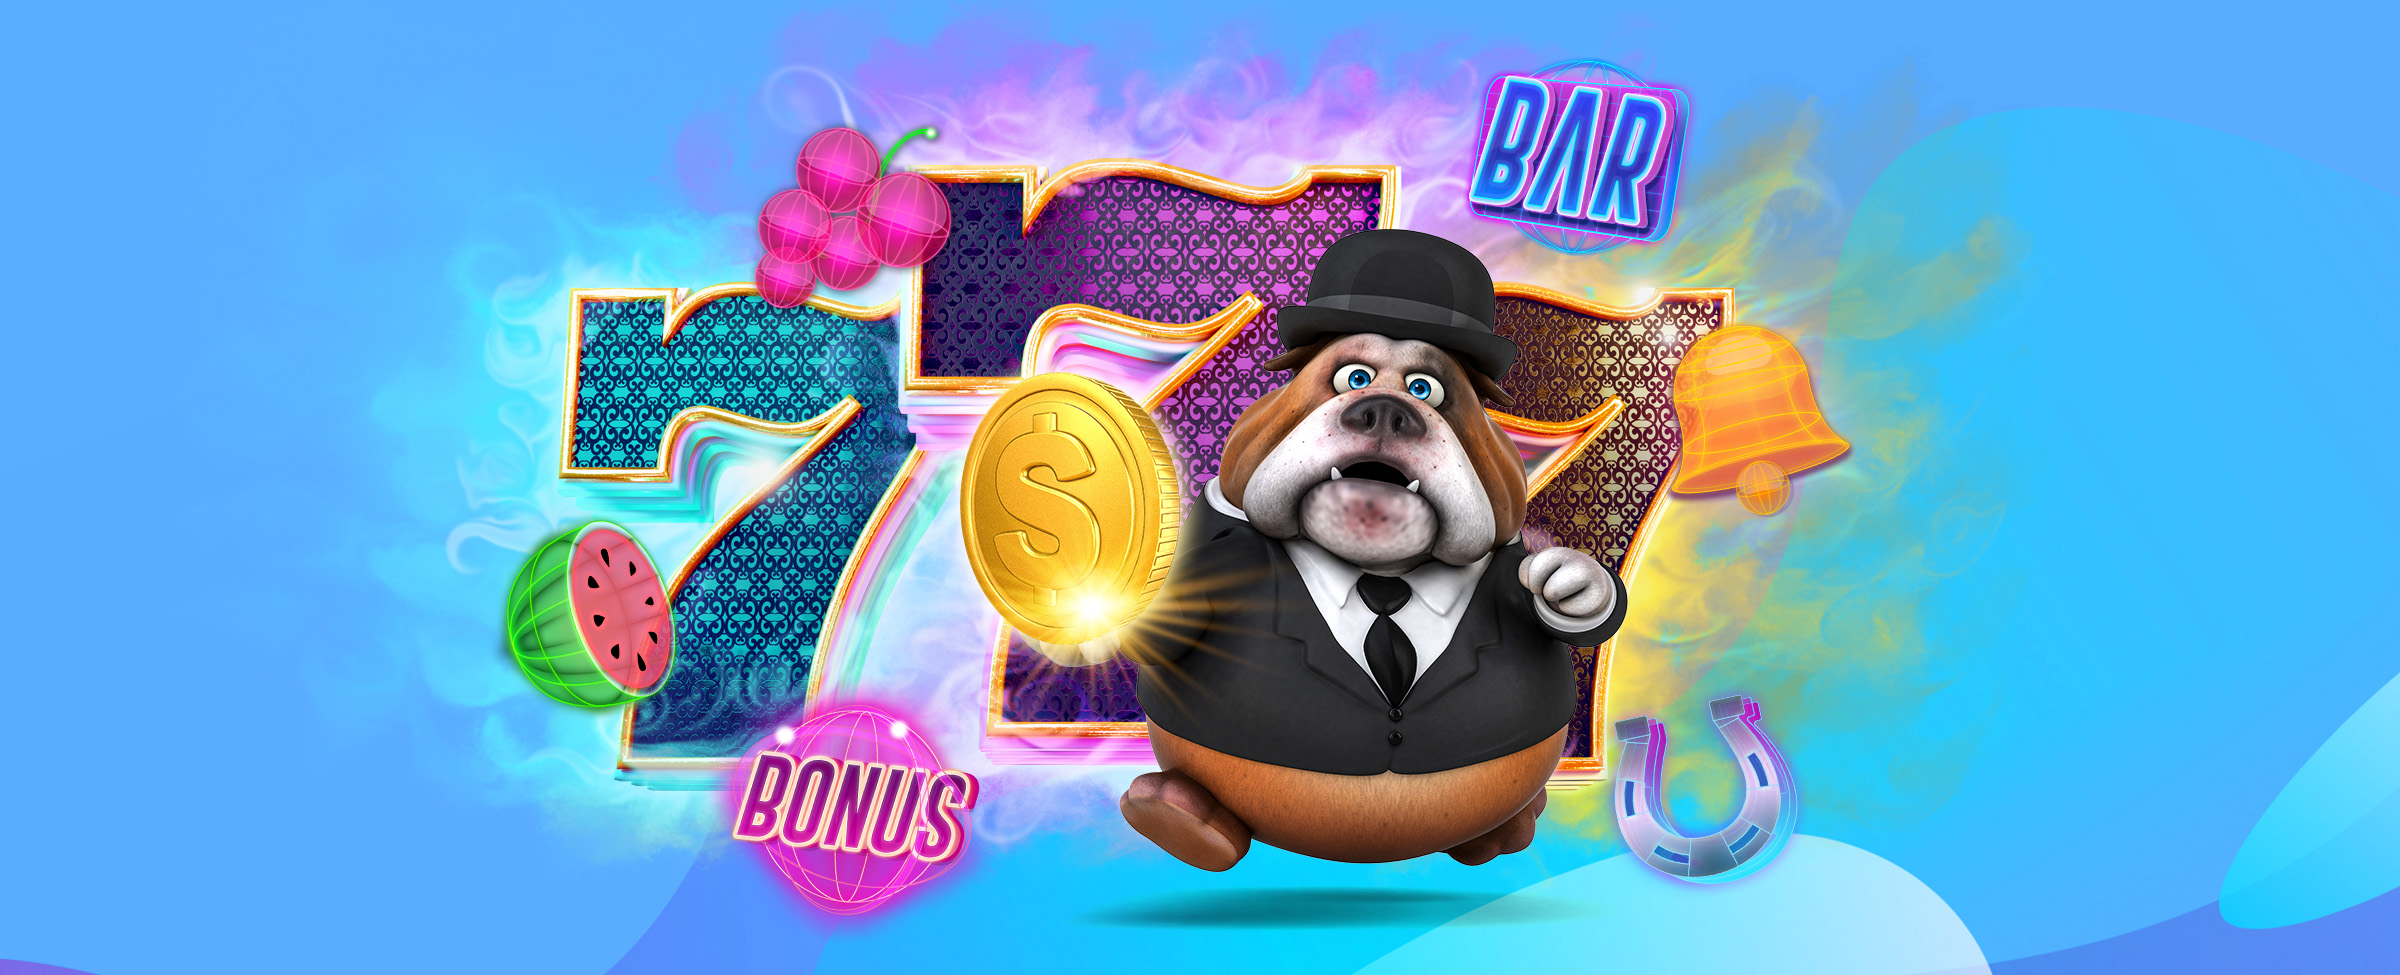 Play 777 Deluxe Hot Drop Jackpots today for a classic throwback slot game with multiple jackpots. This game is a top shortlist contender, will it make yours?